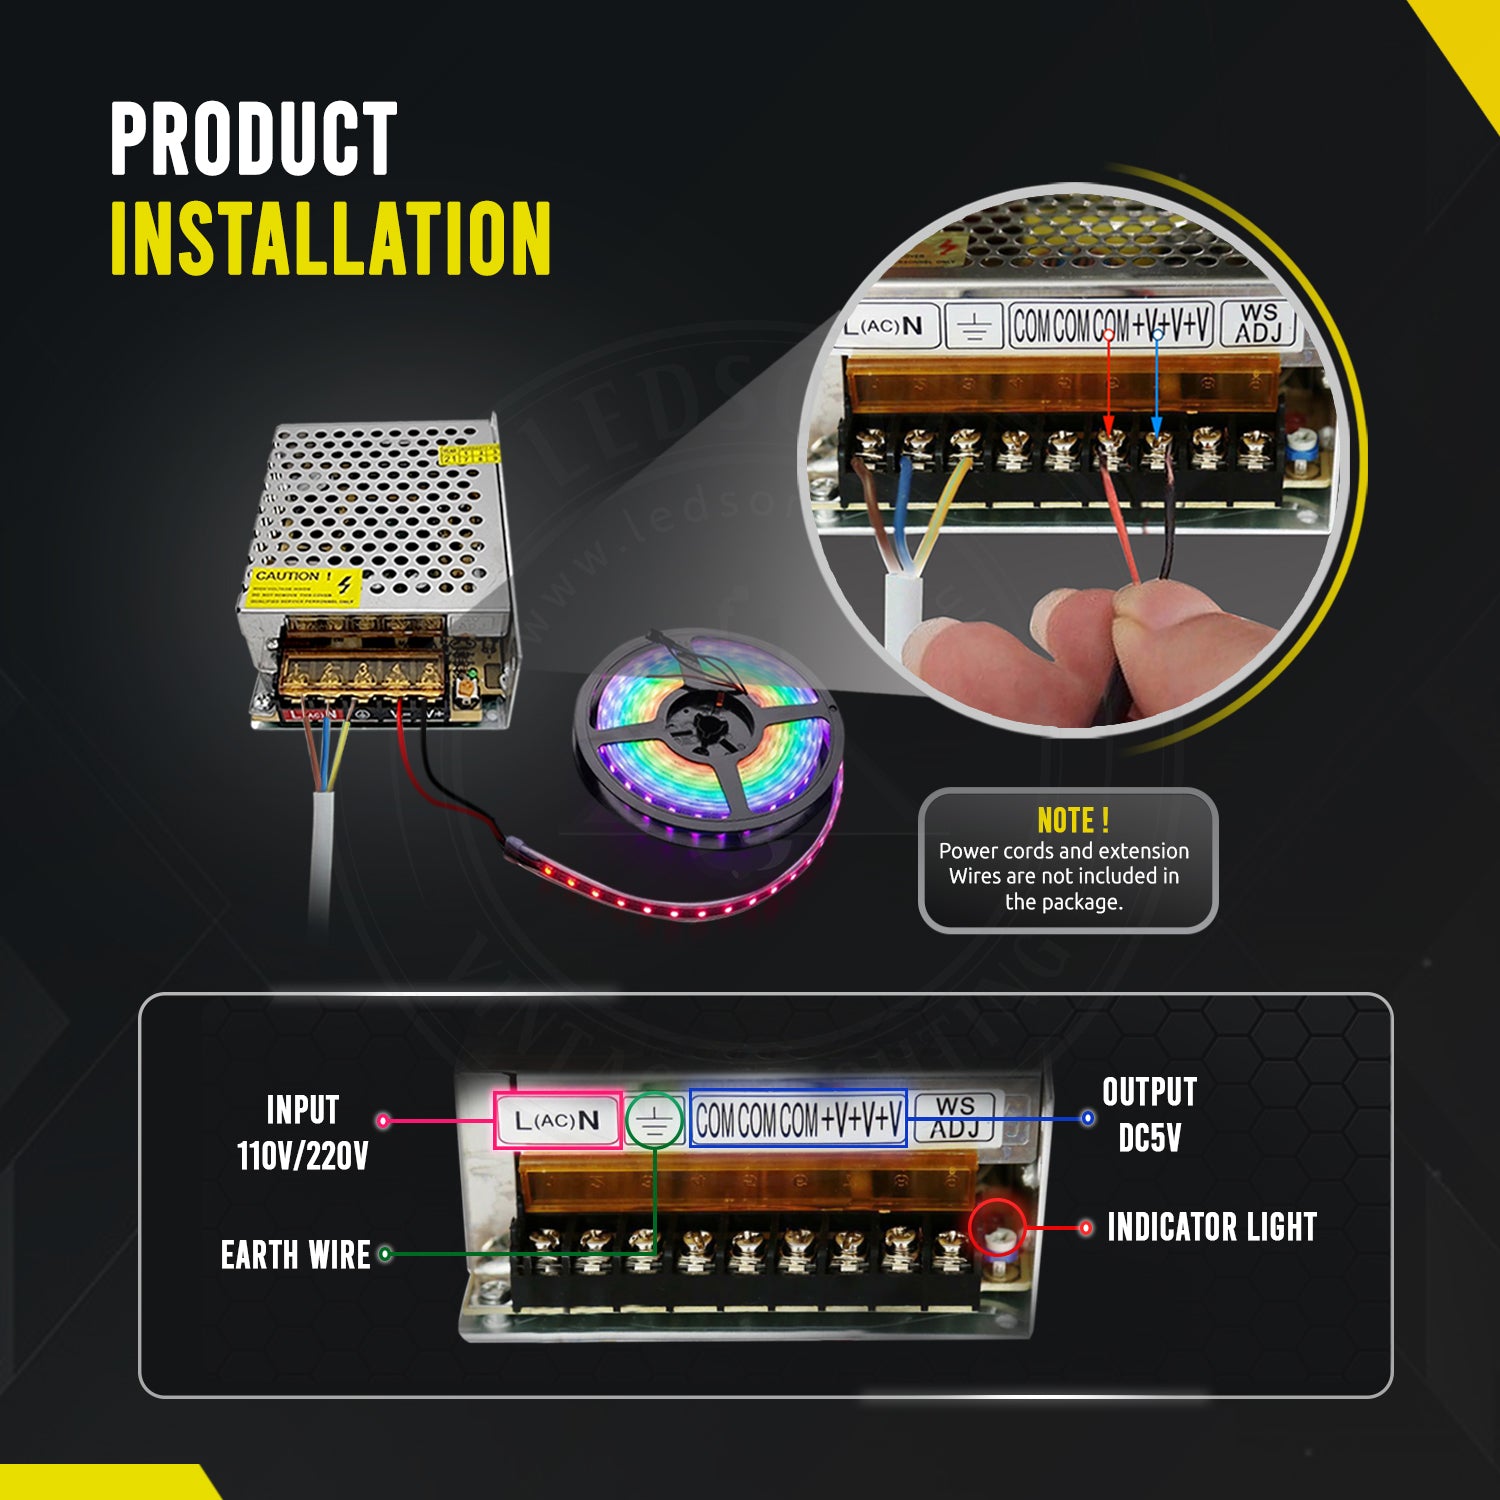 DC 5V IP20 - Product Installations